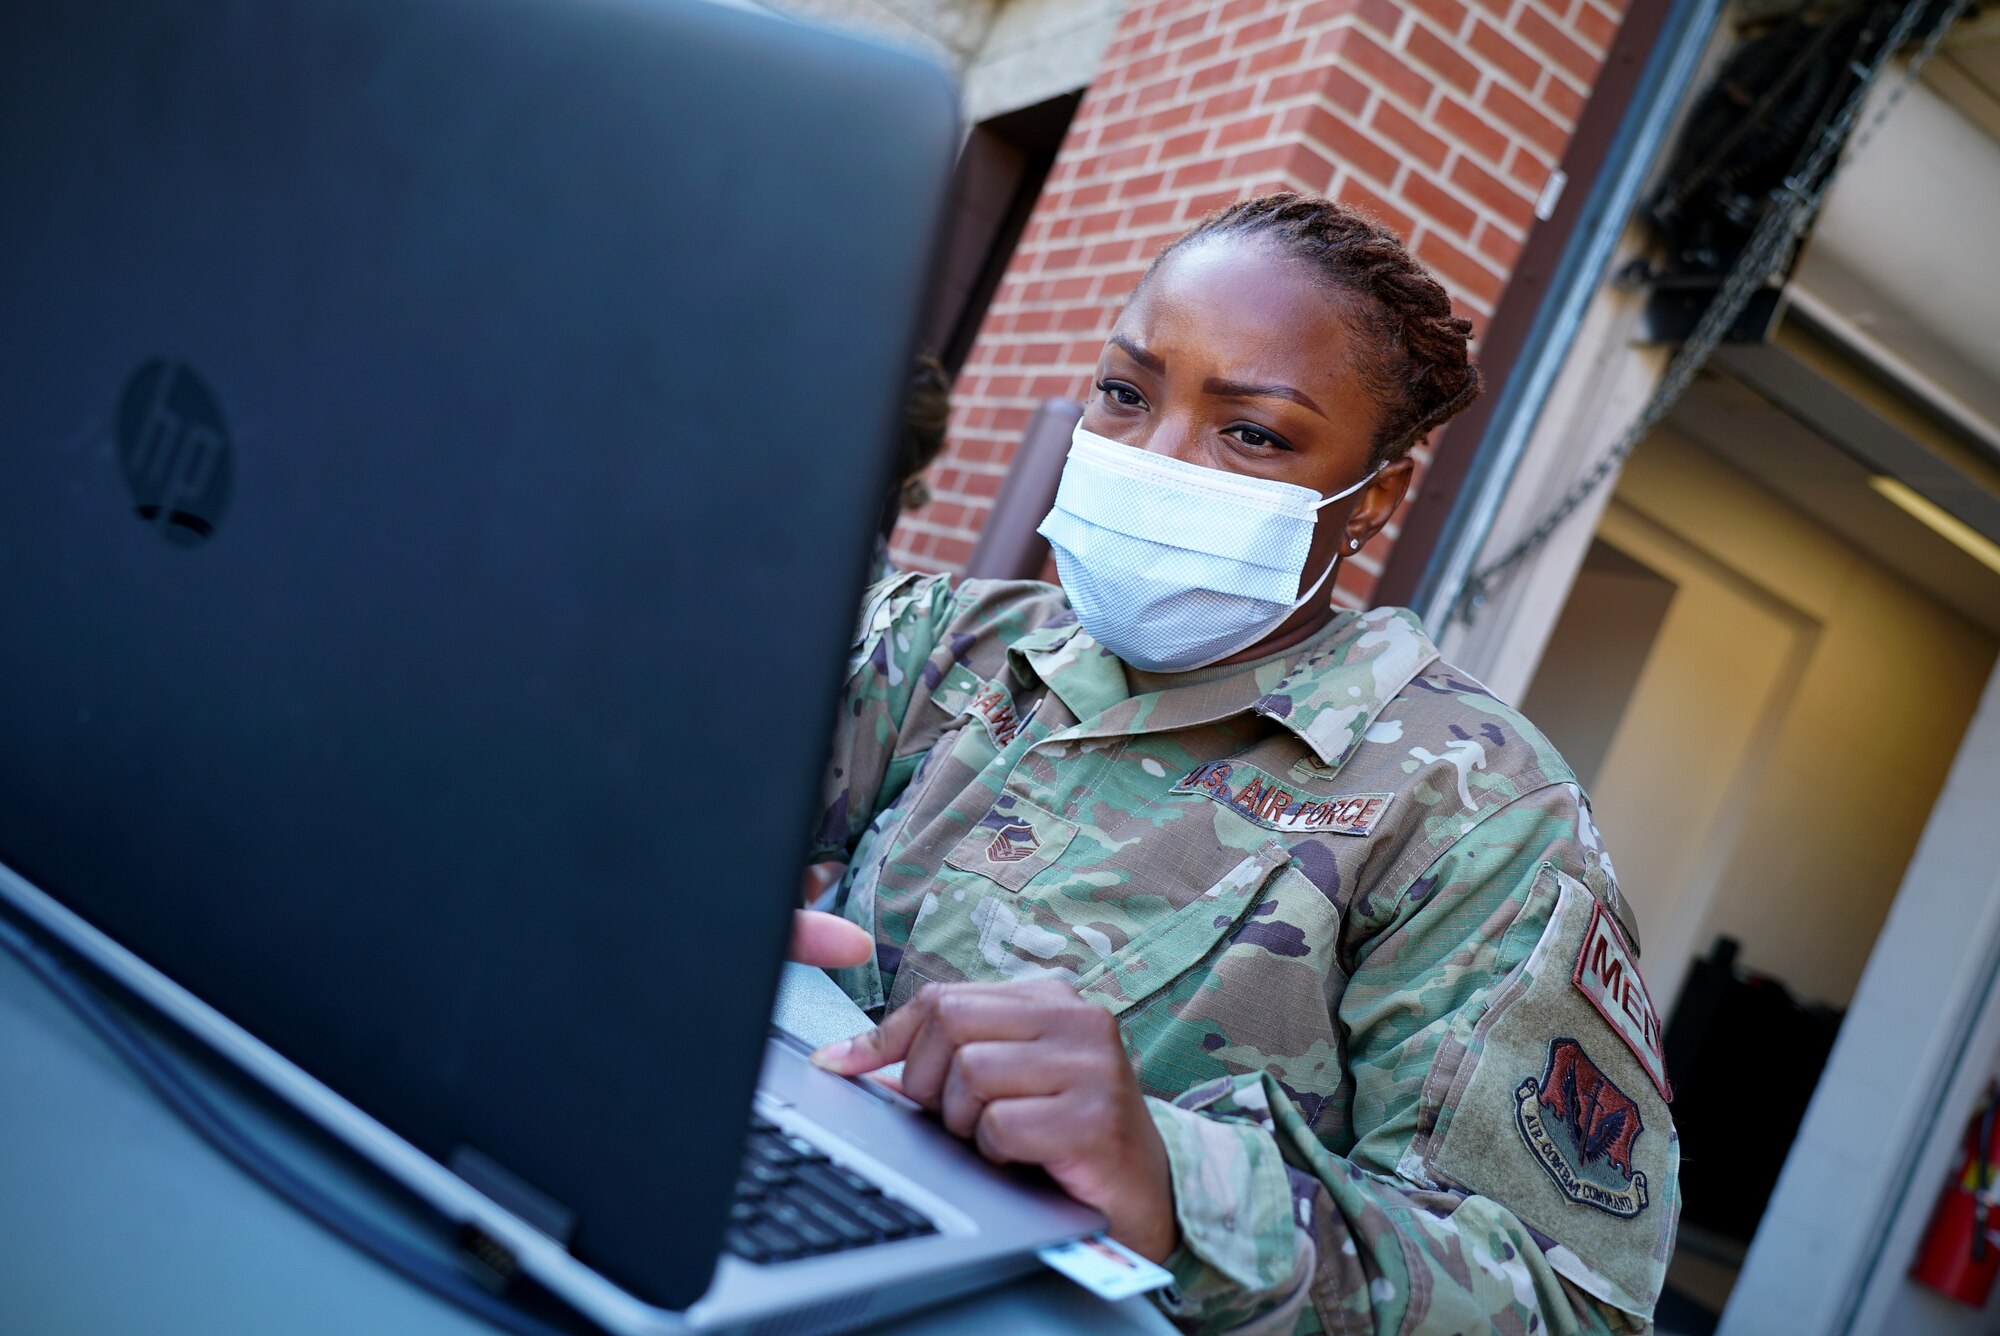 A female medical technician wears a protective face mask as she sits behind a grey laptop.